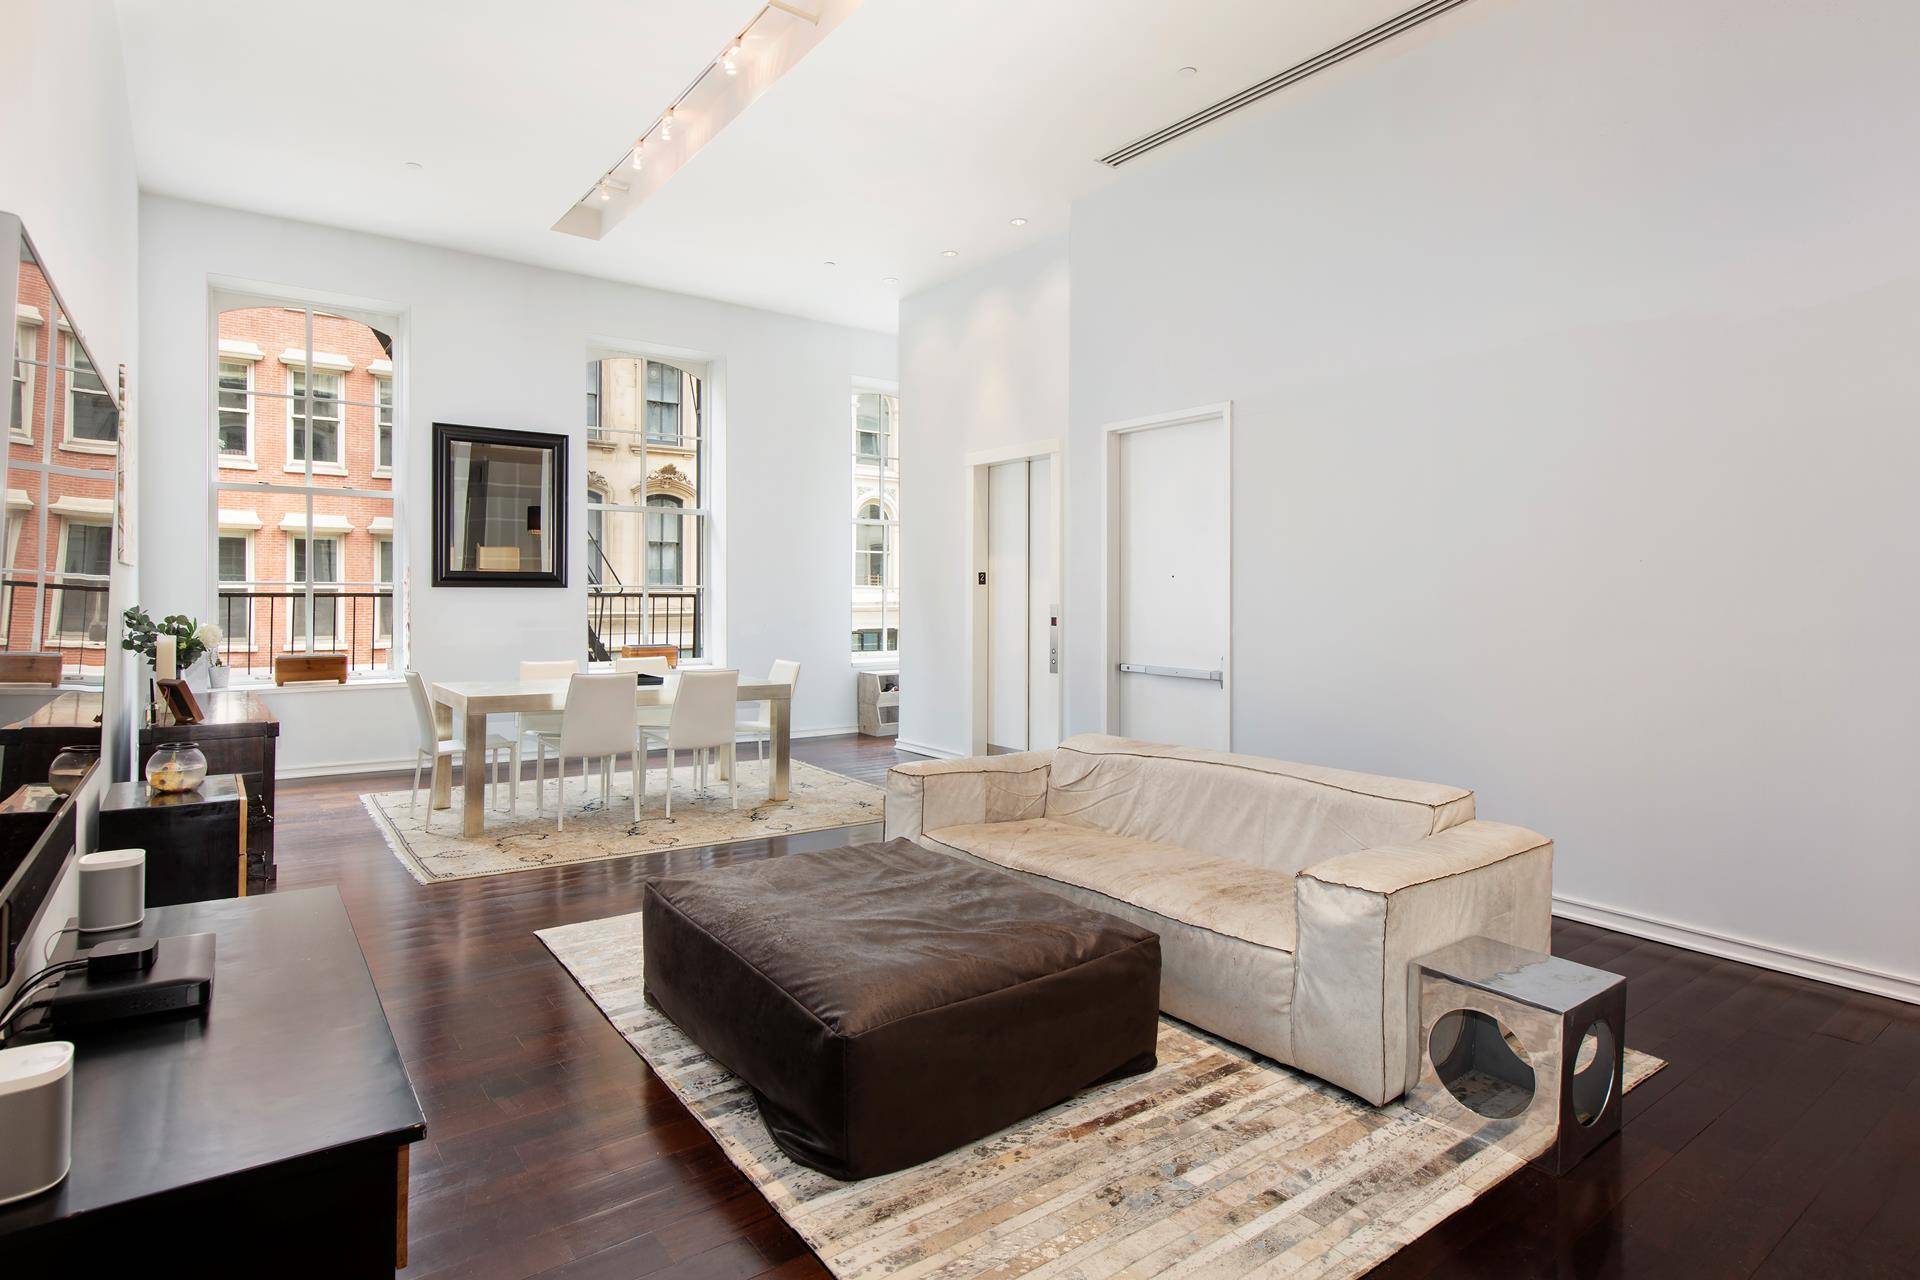 Don't Miss this Stunning, Full Floor Loft Condo with 2 Beds, 2 Baths, a Den and 14' Ceilings in the heart of Tribeca !